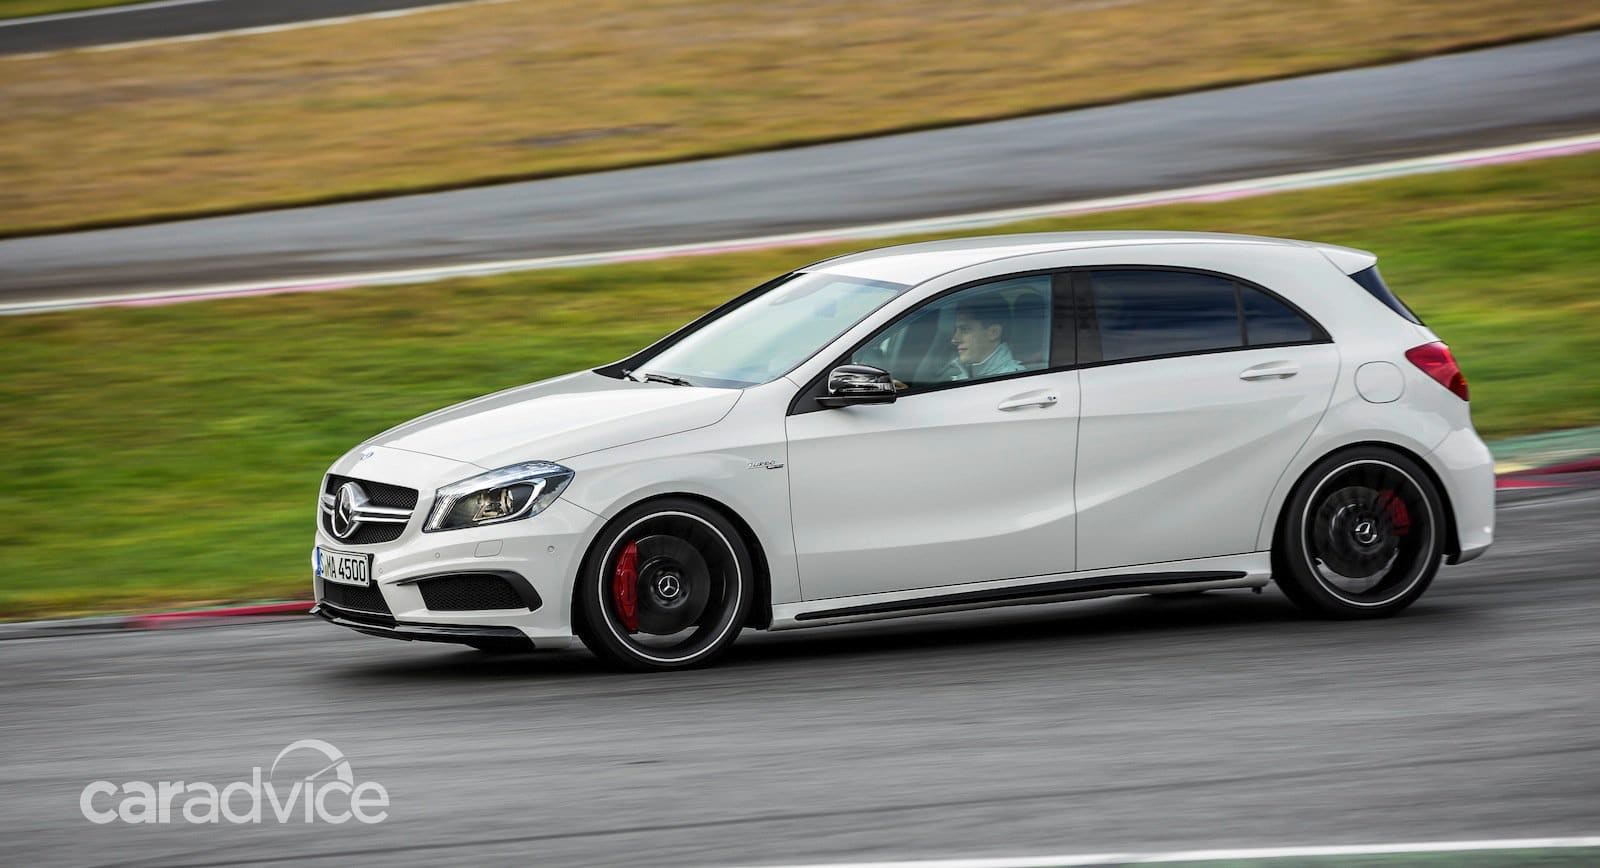 Mercedes Benz A45 Amg 265kw Hot Hatch Unleashed Caradvice